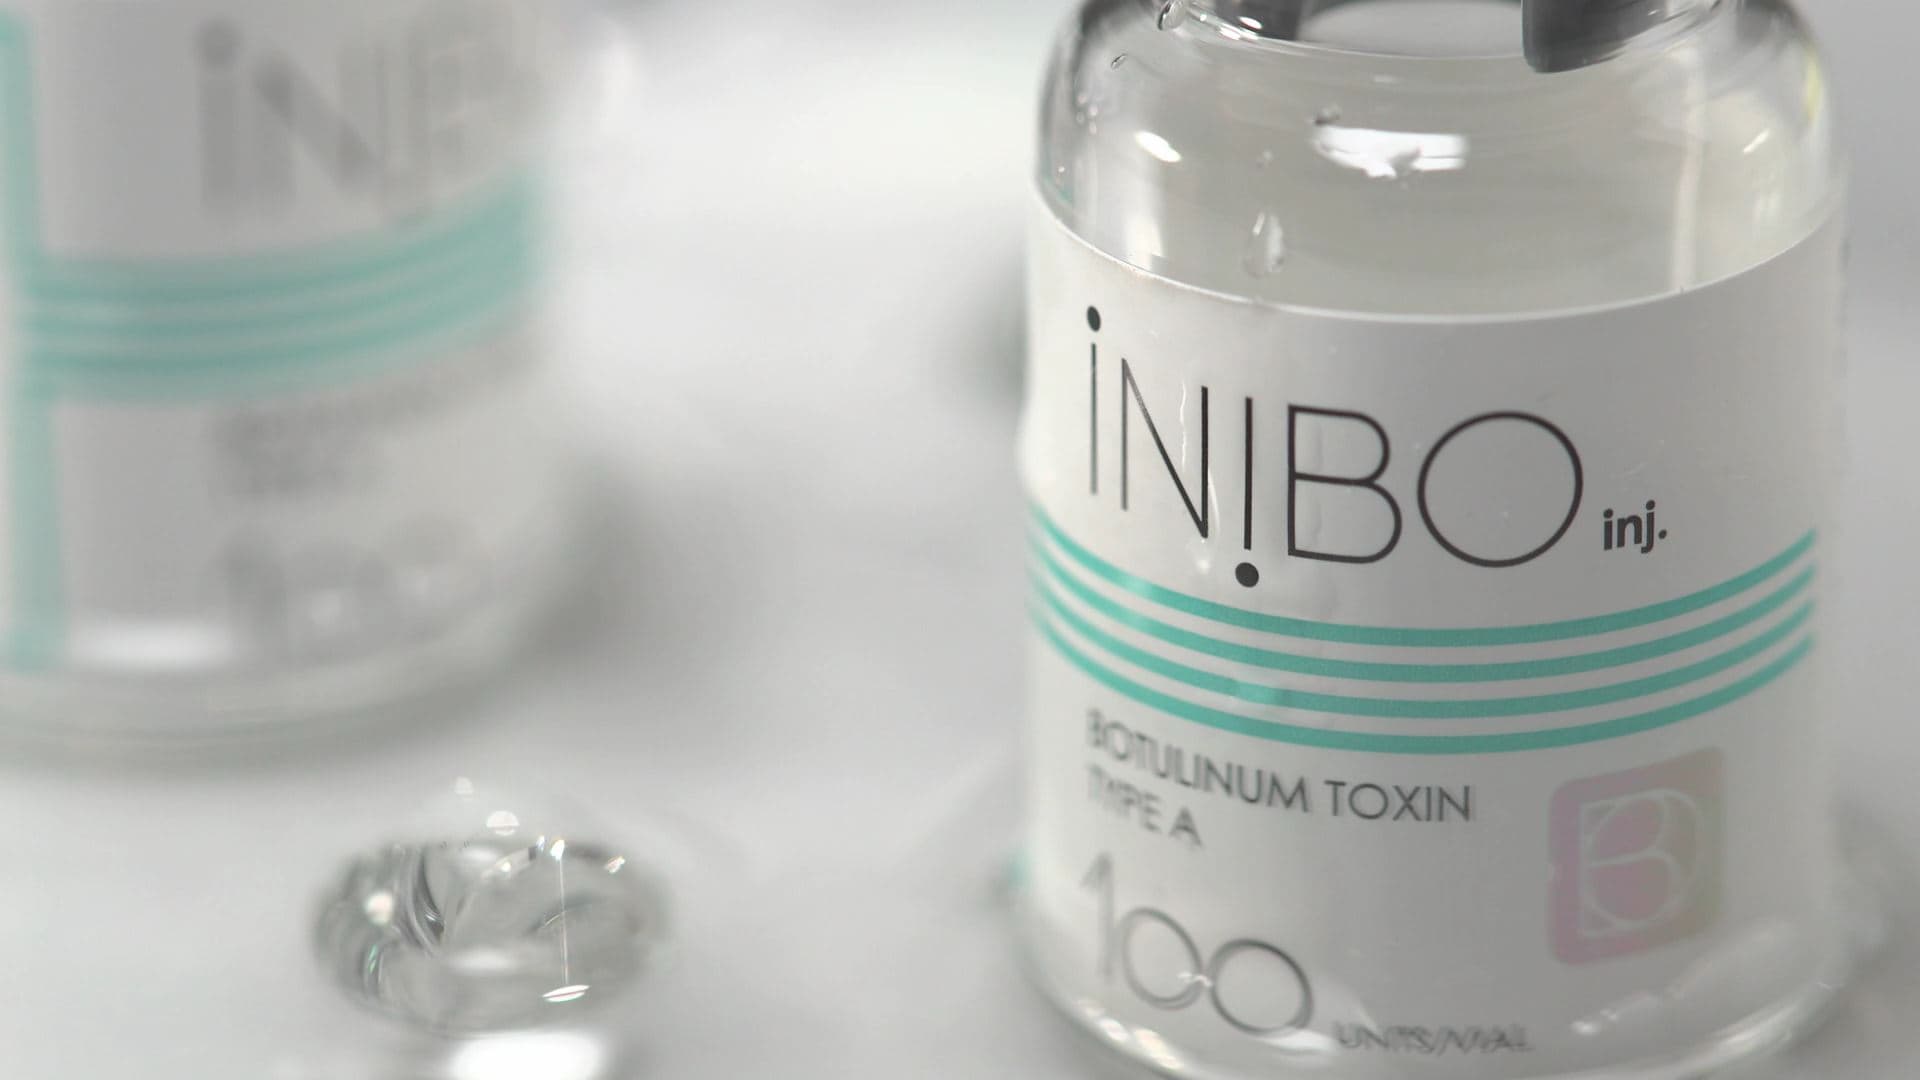 INIBO_Injection to reduce fine lines and wrinkles